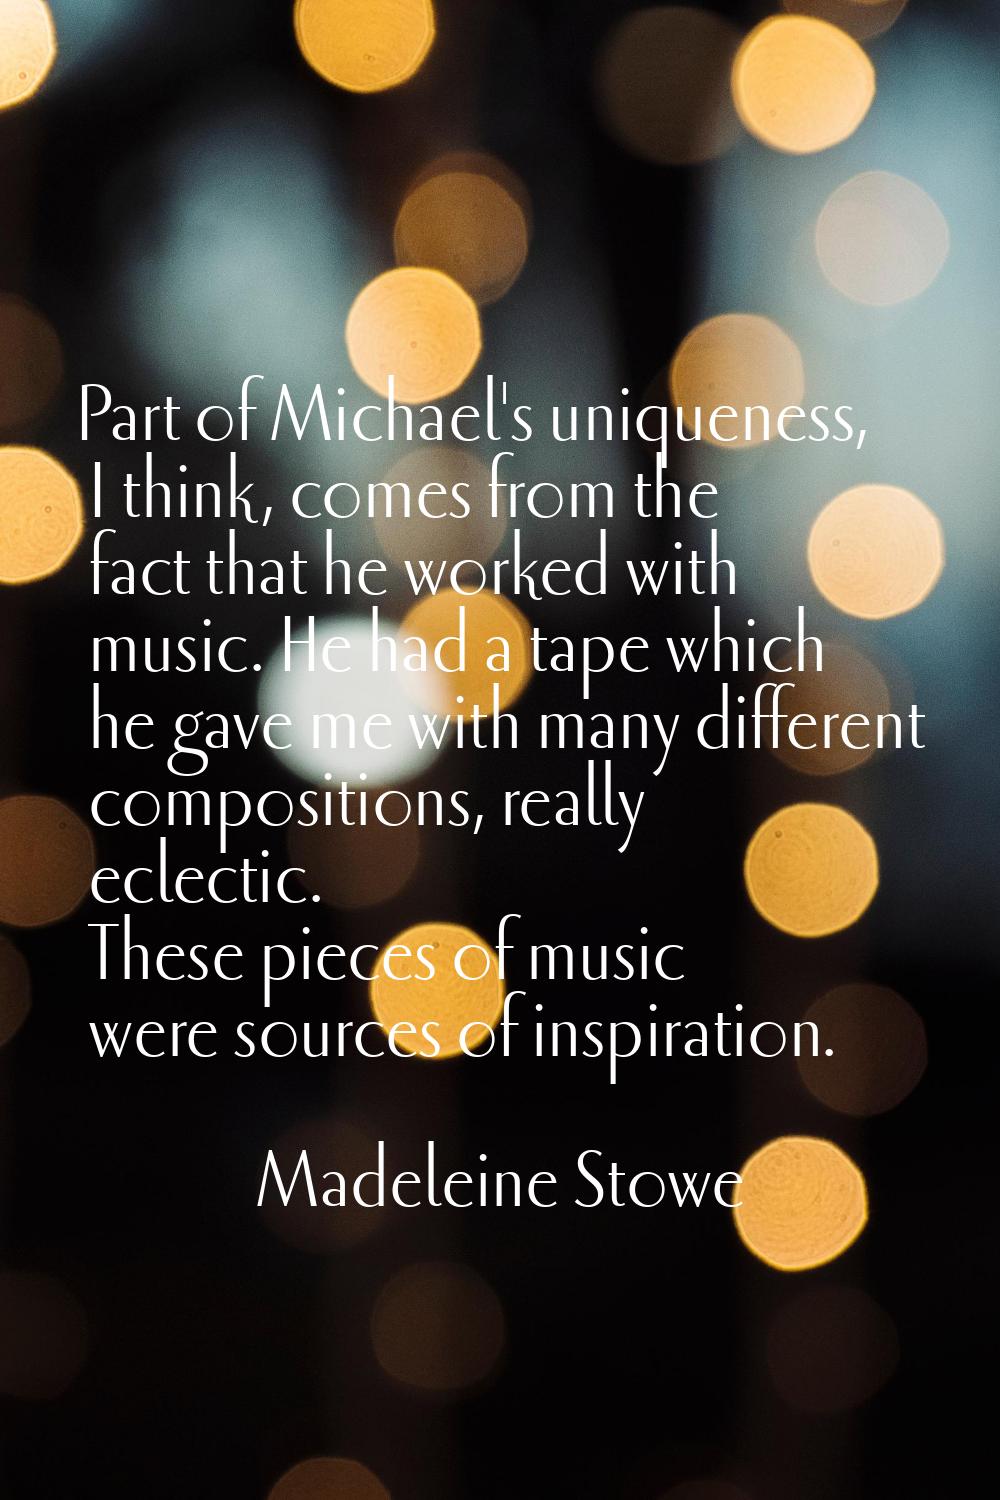 Part of Michael's uniqueness, I think, comes from the fact that he worked with music. He had a tape